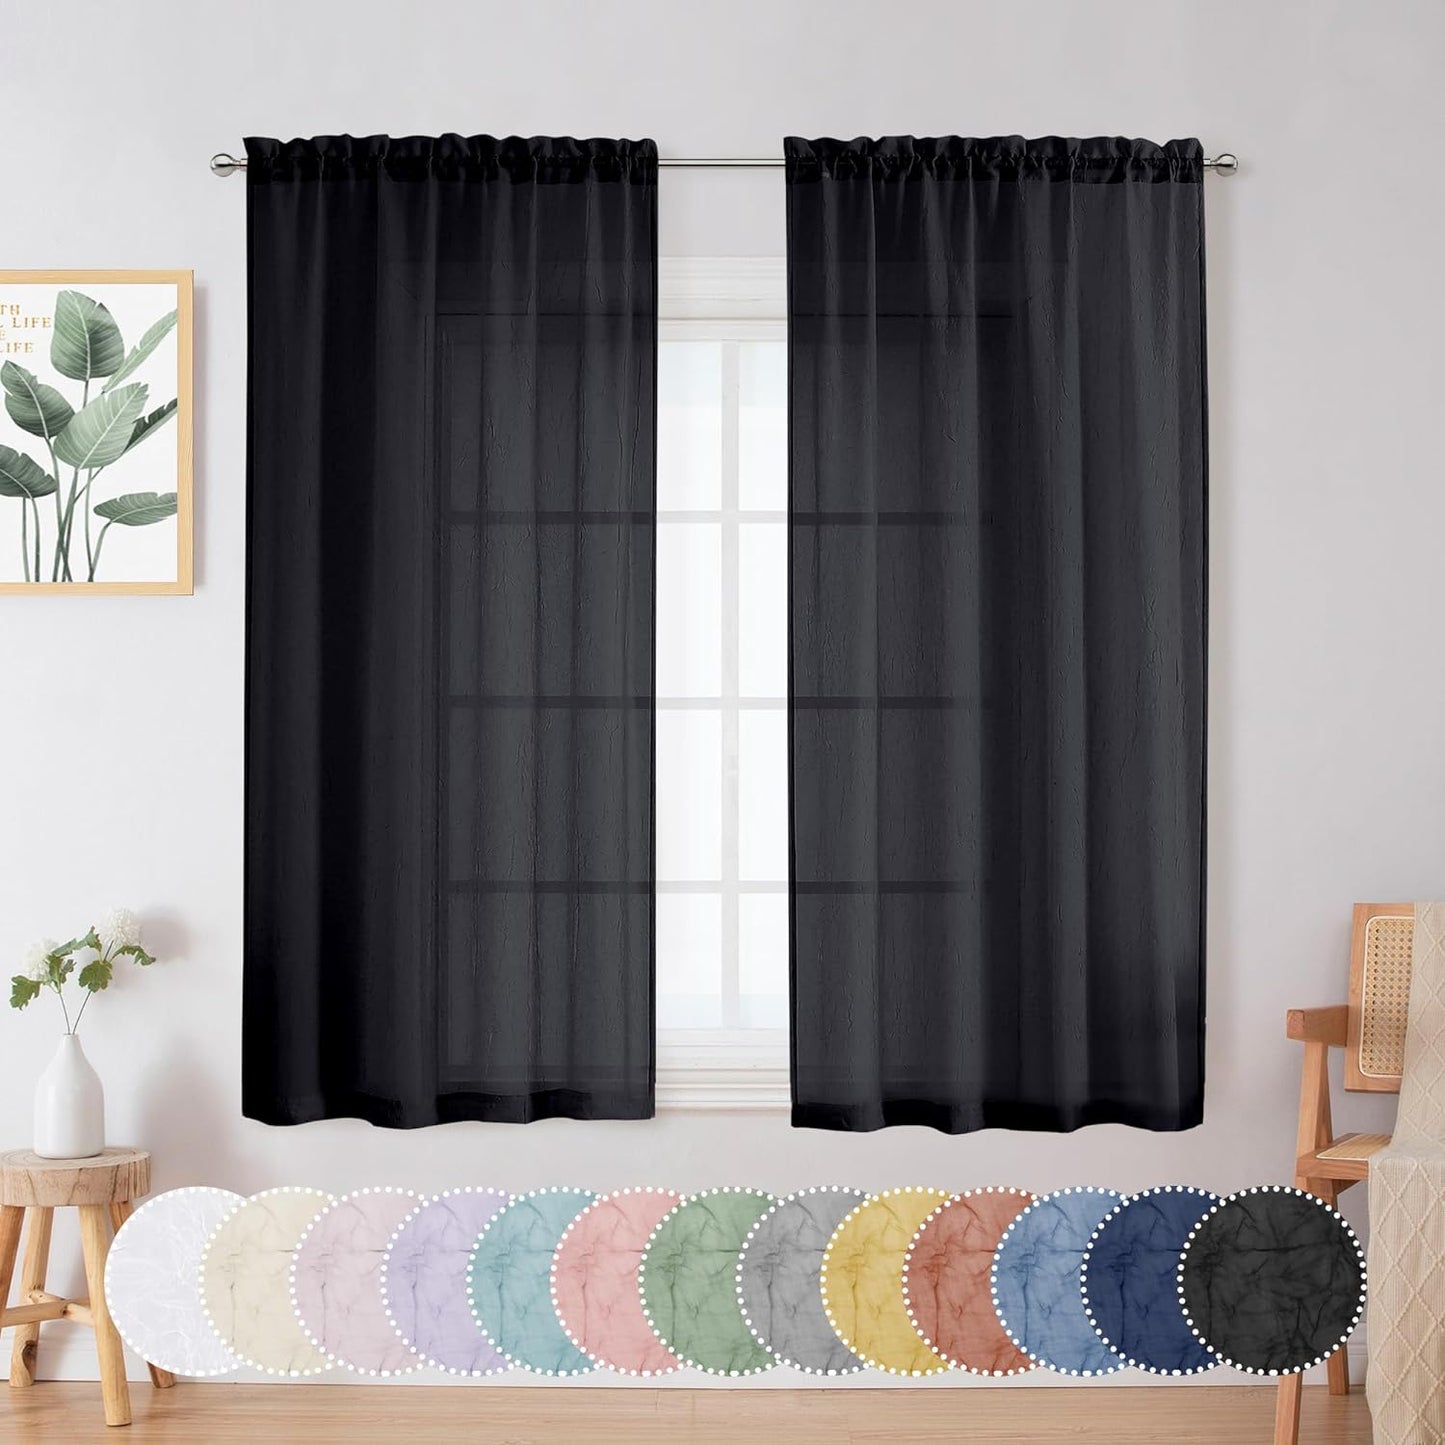 Crushed Sheer White Curtains 63 Inch Length 2 Panels, Light Filtering Solid Crinkle Voile Short Sheer Curtian for Bedroom Living Room, Each 42Wx63L Inches  Chyhomenyc Black 42 W X 54 L 